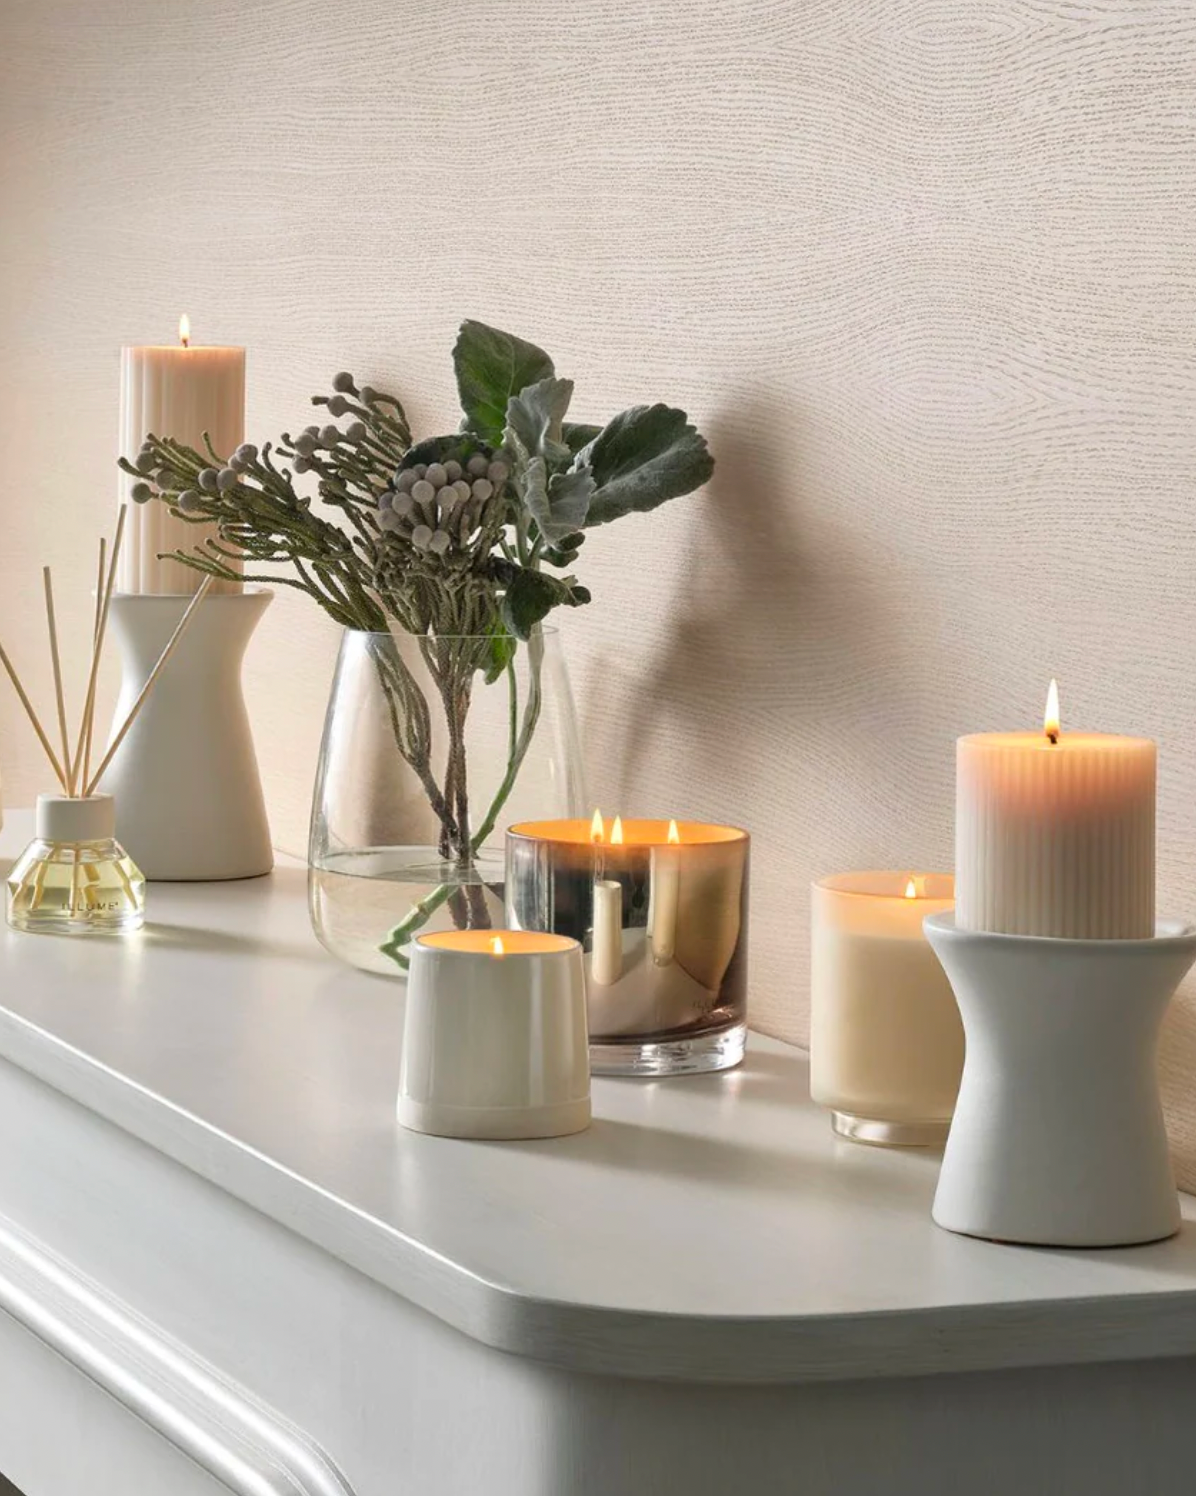 Image of ILLUME Winter white shine ceramic candle on a shelf with other candles